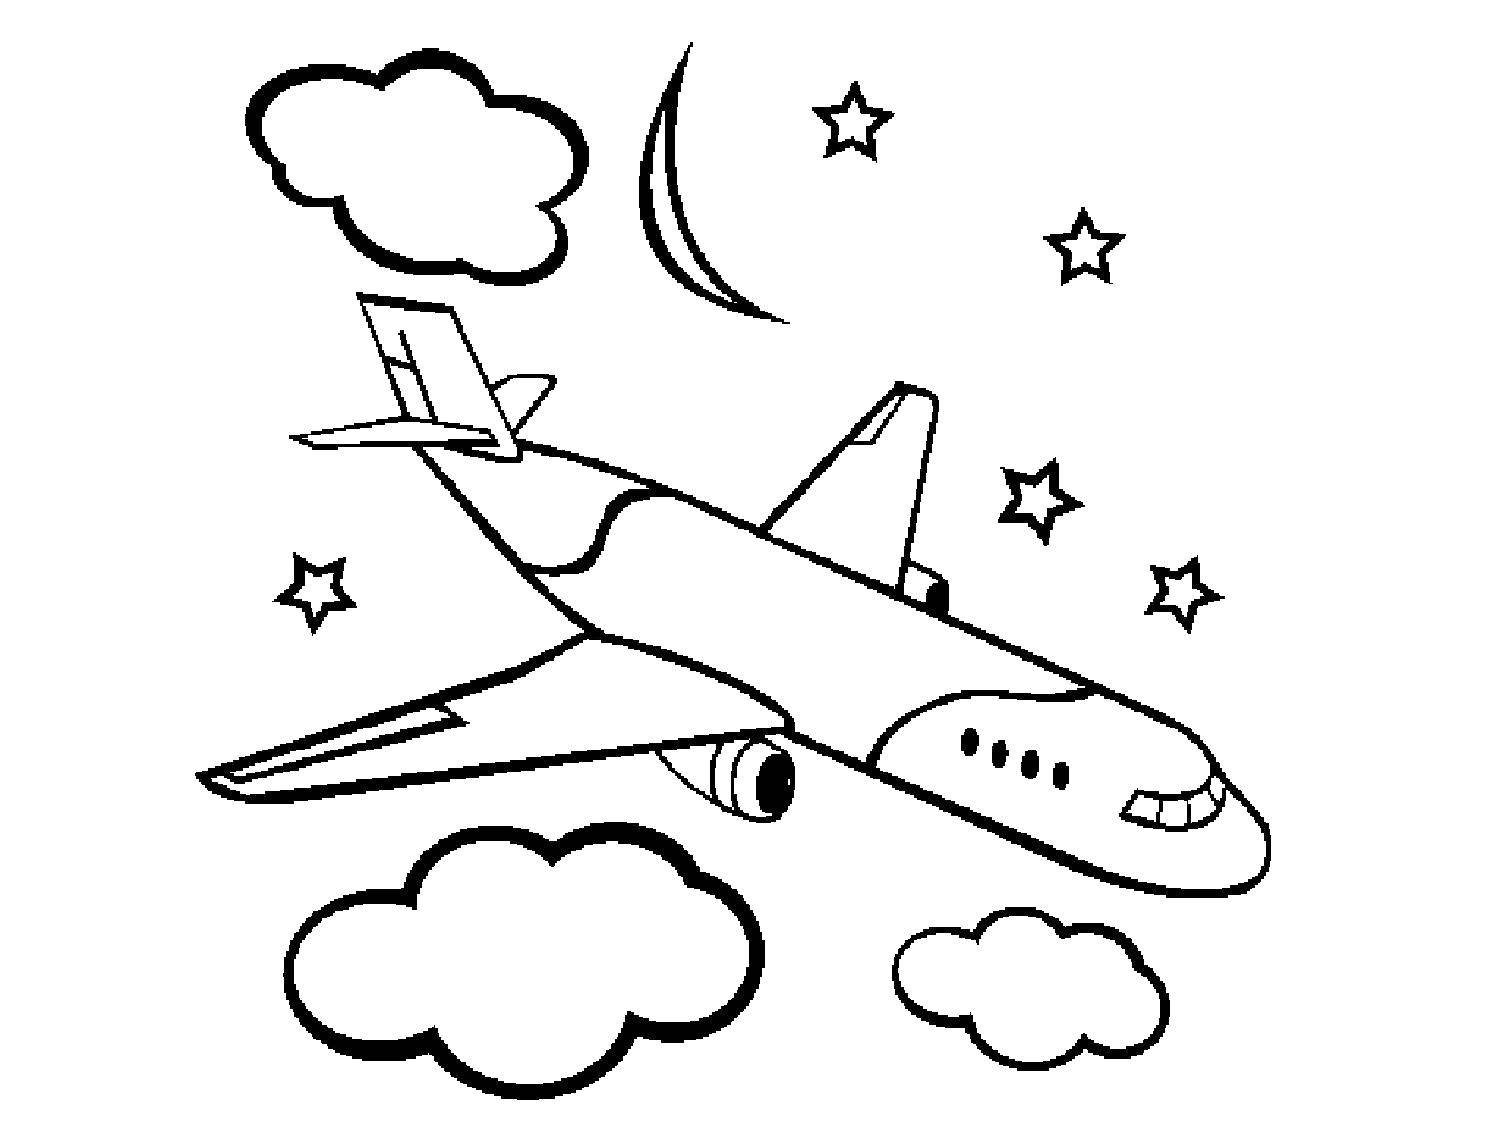 Coloring The plane. Category transportation. Tags:  airplane, clouds.